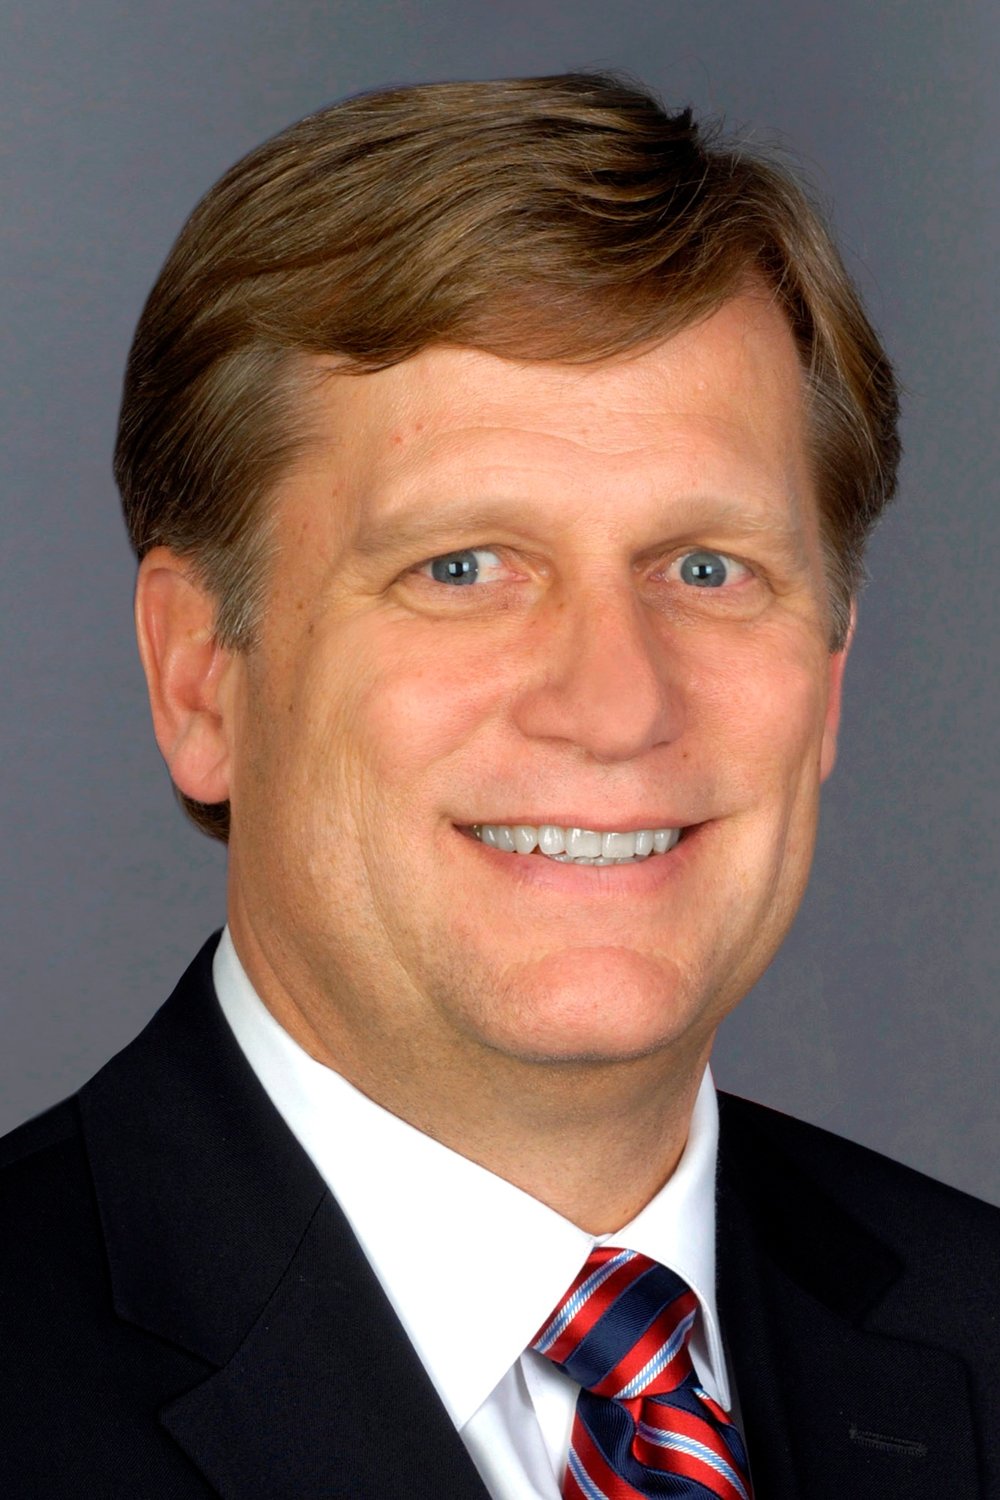 AMB. MICHAEL MCFAUL   Ambassador of the United States to the Russian Federation